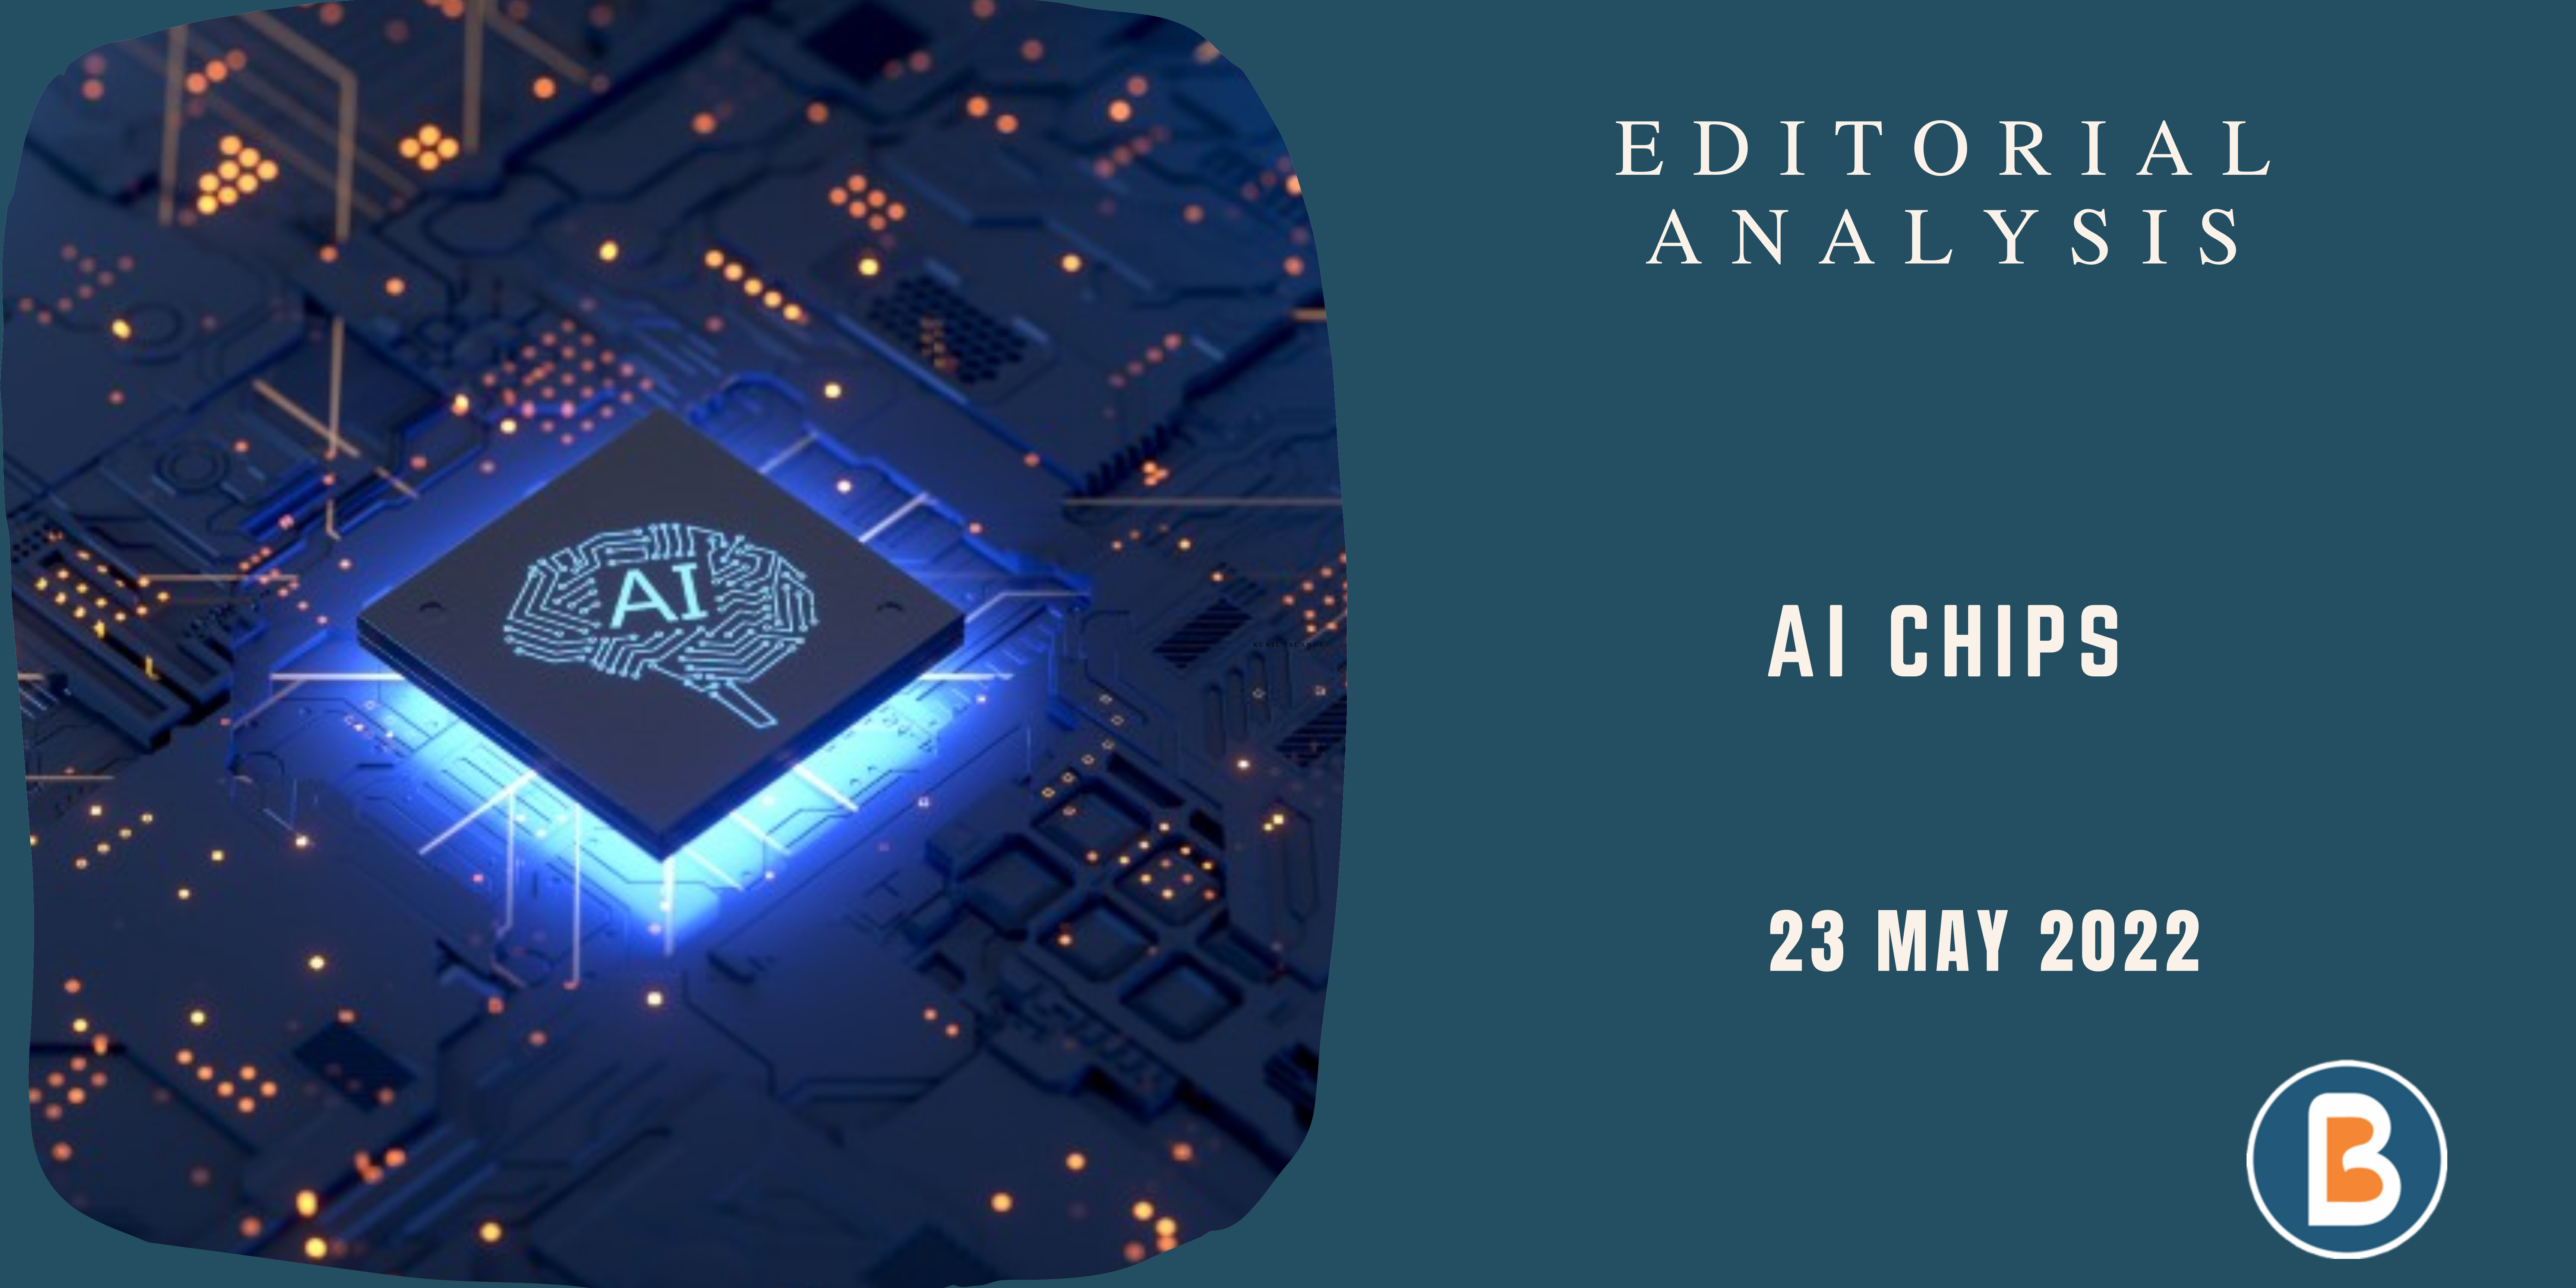 Editorial Analysis for Civil Services - What are AI Chips? A Complete Overview